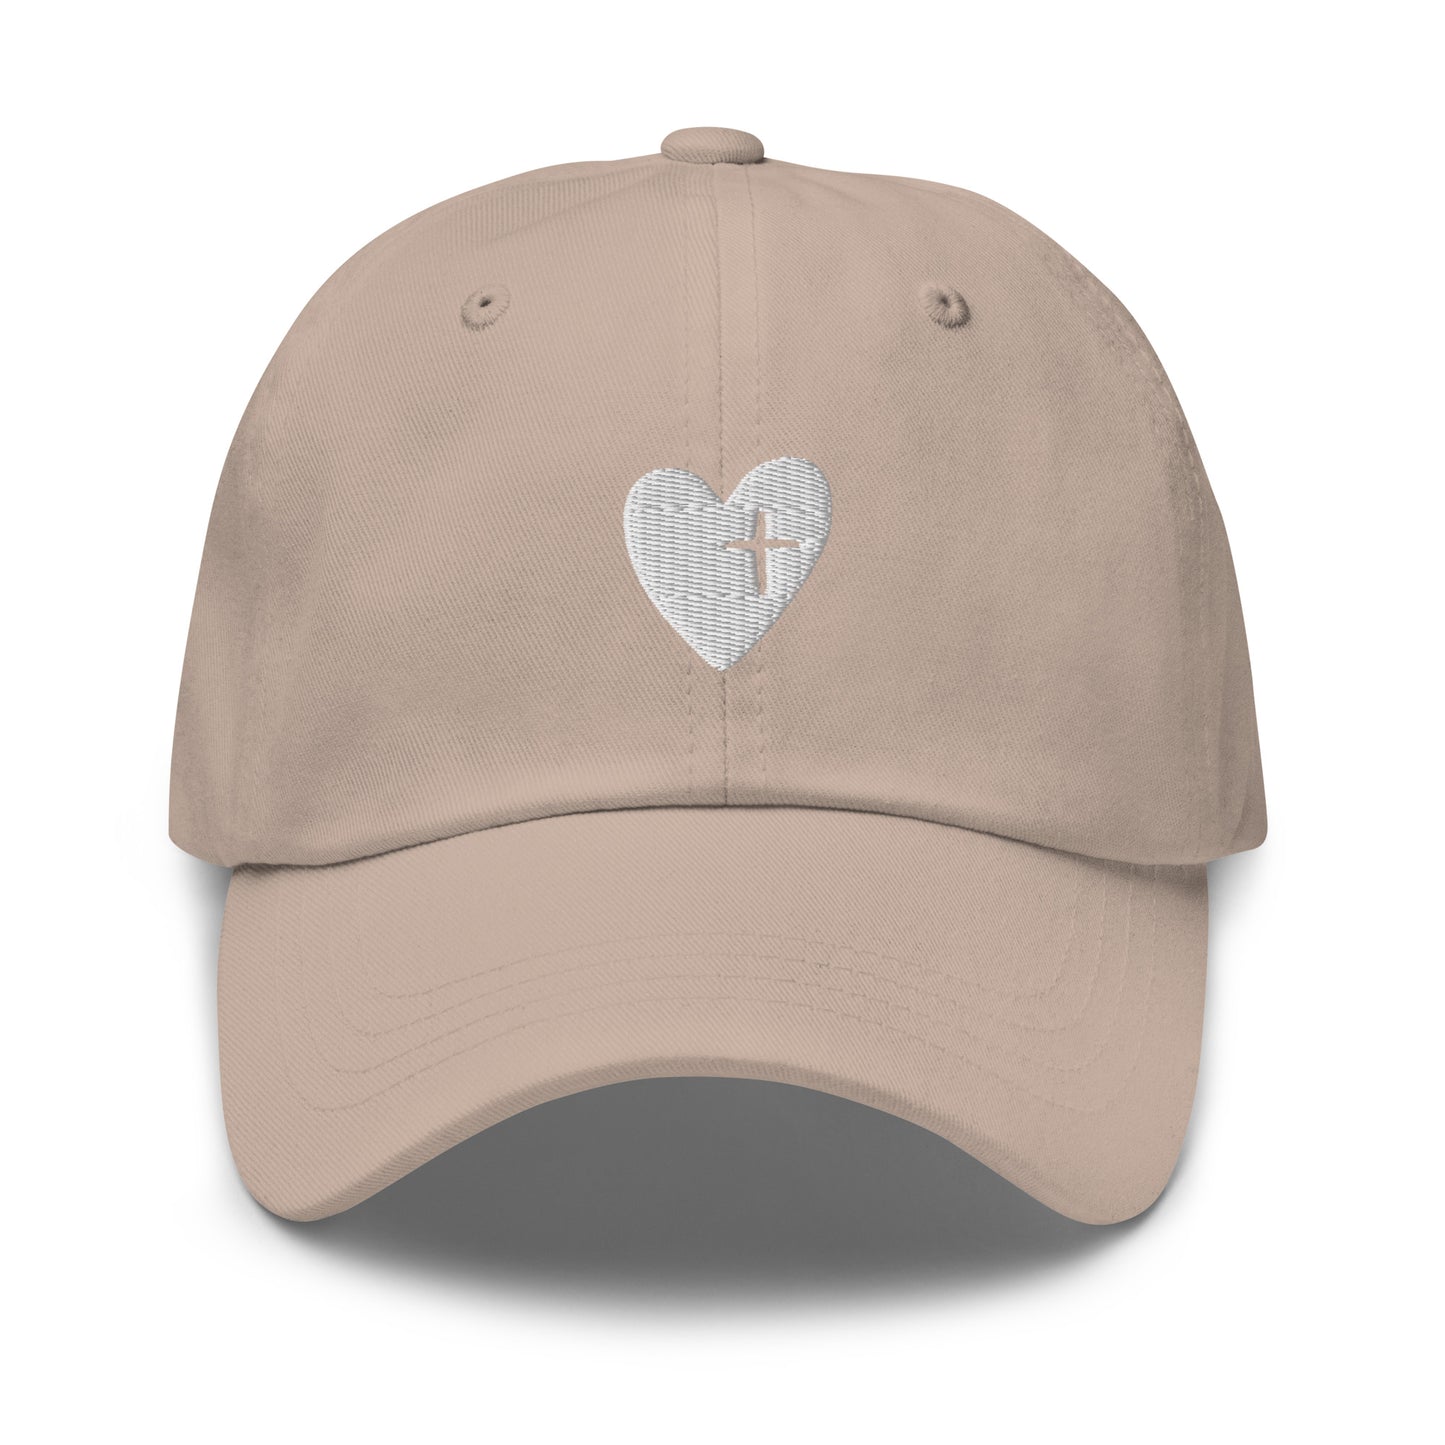 Trust Embroidered Hat